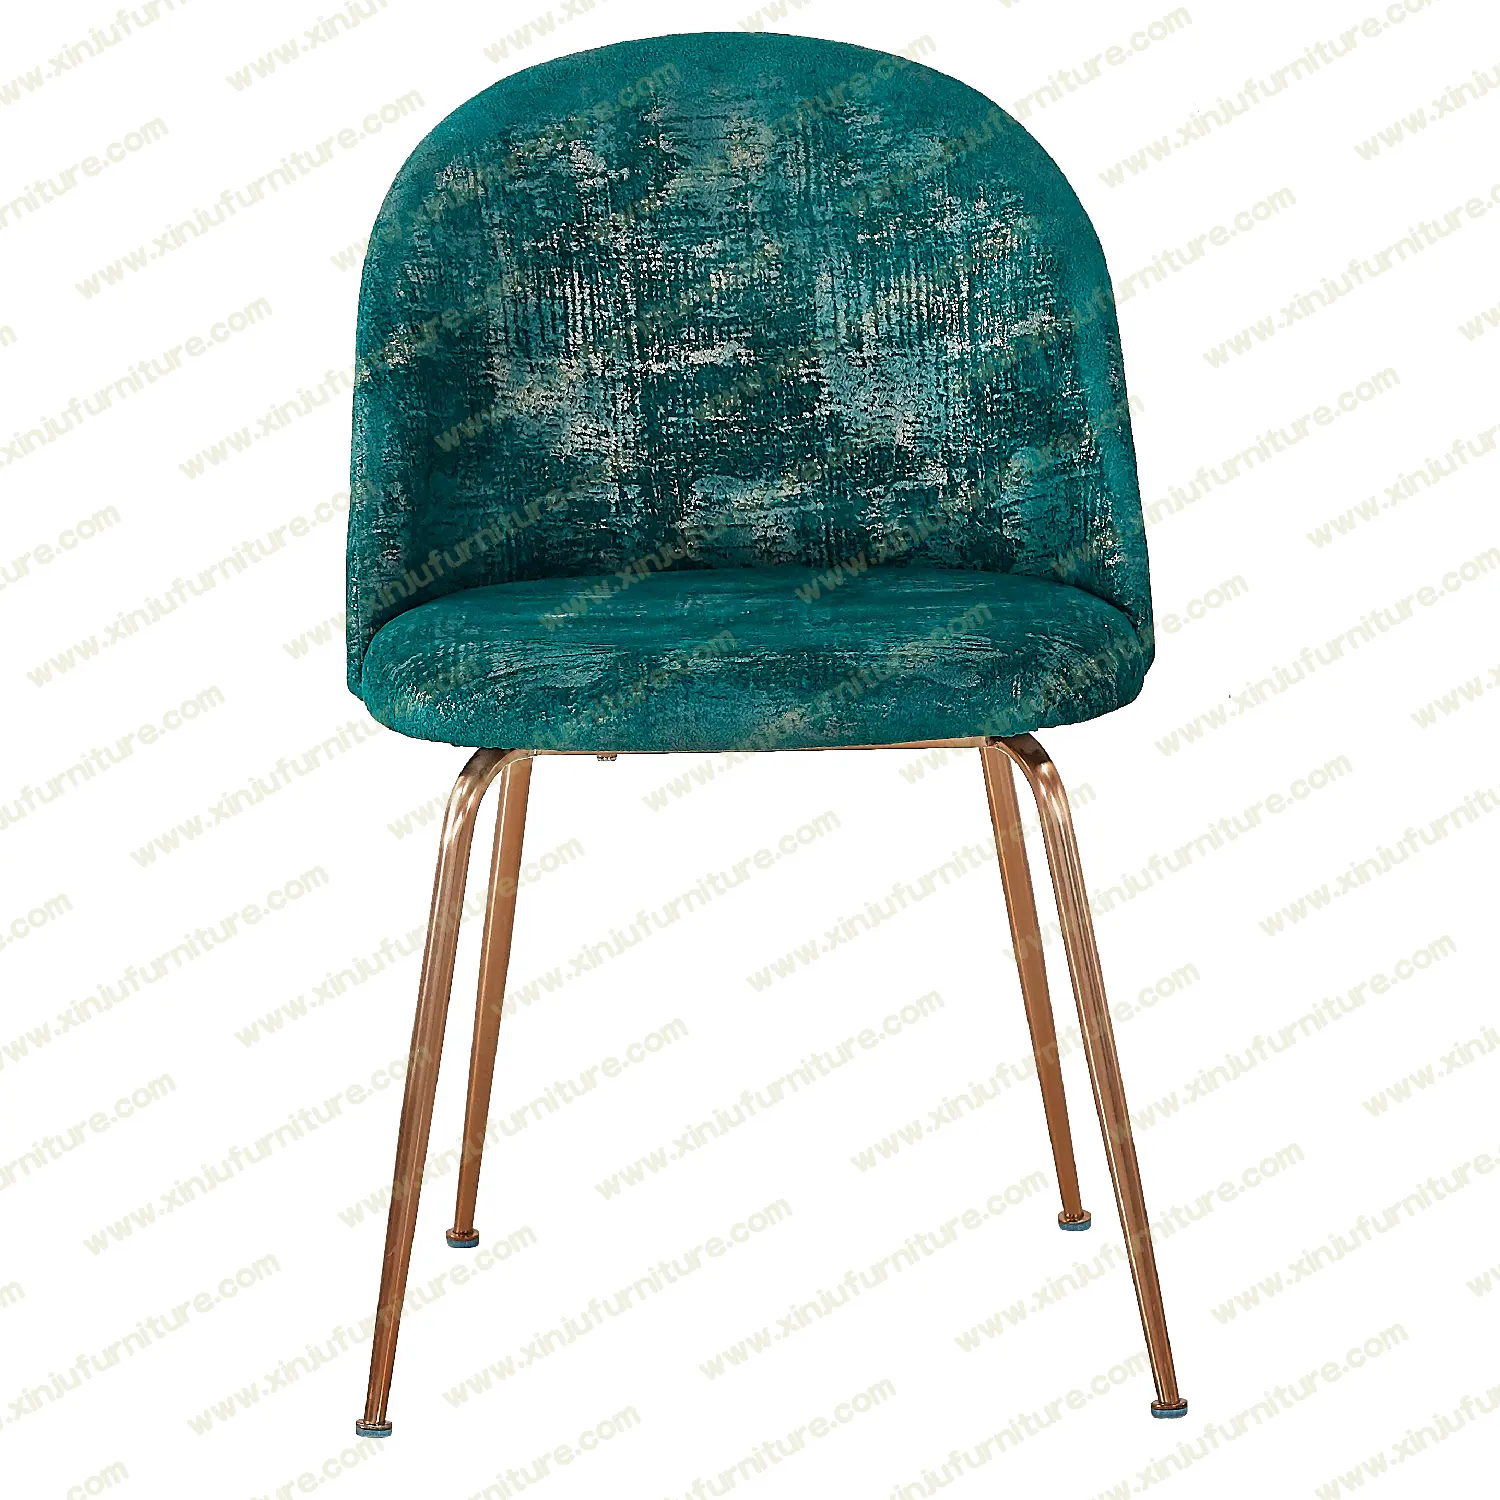 Retro style patched Dining Chair Blue